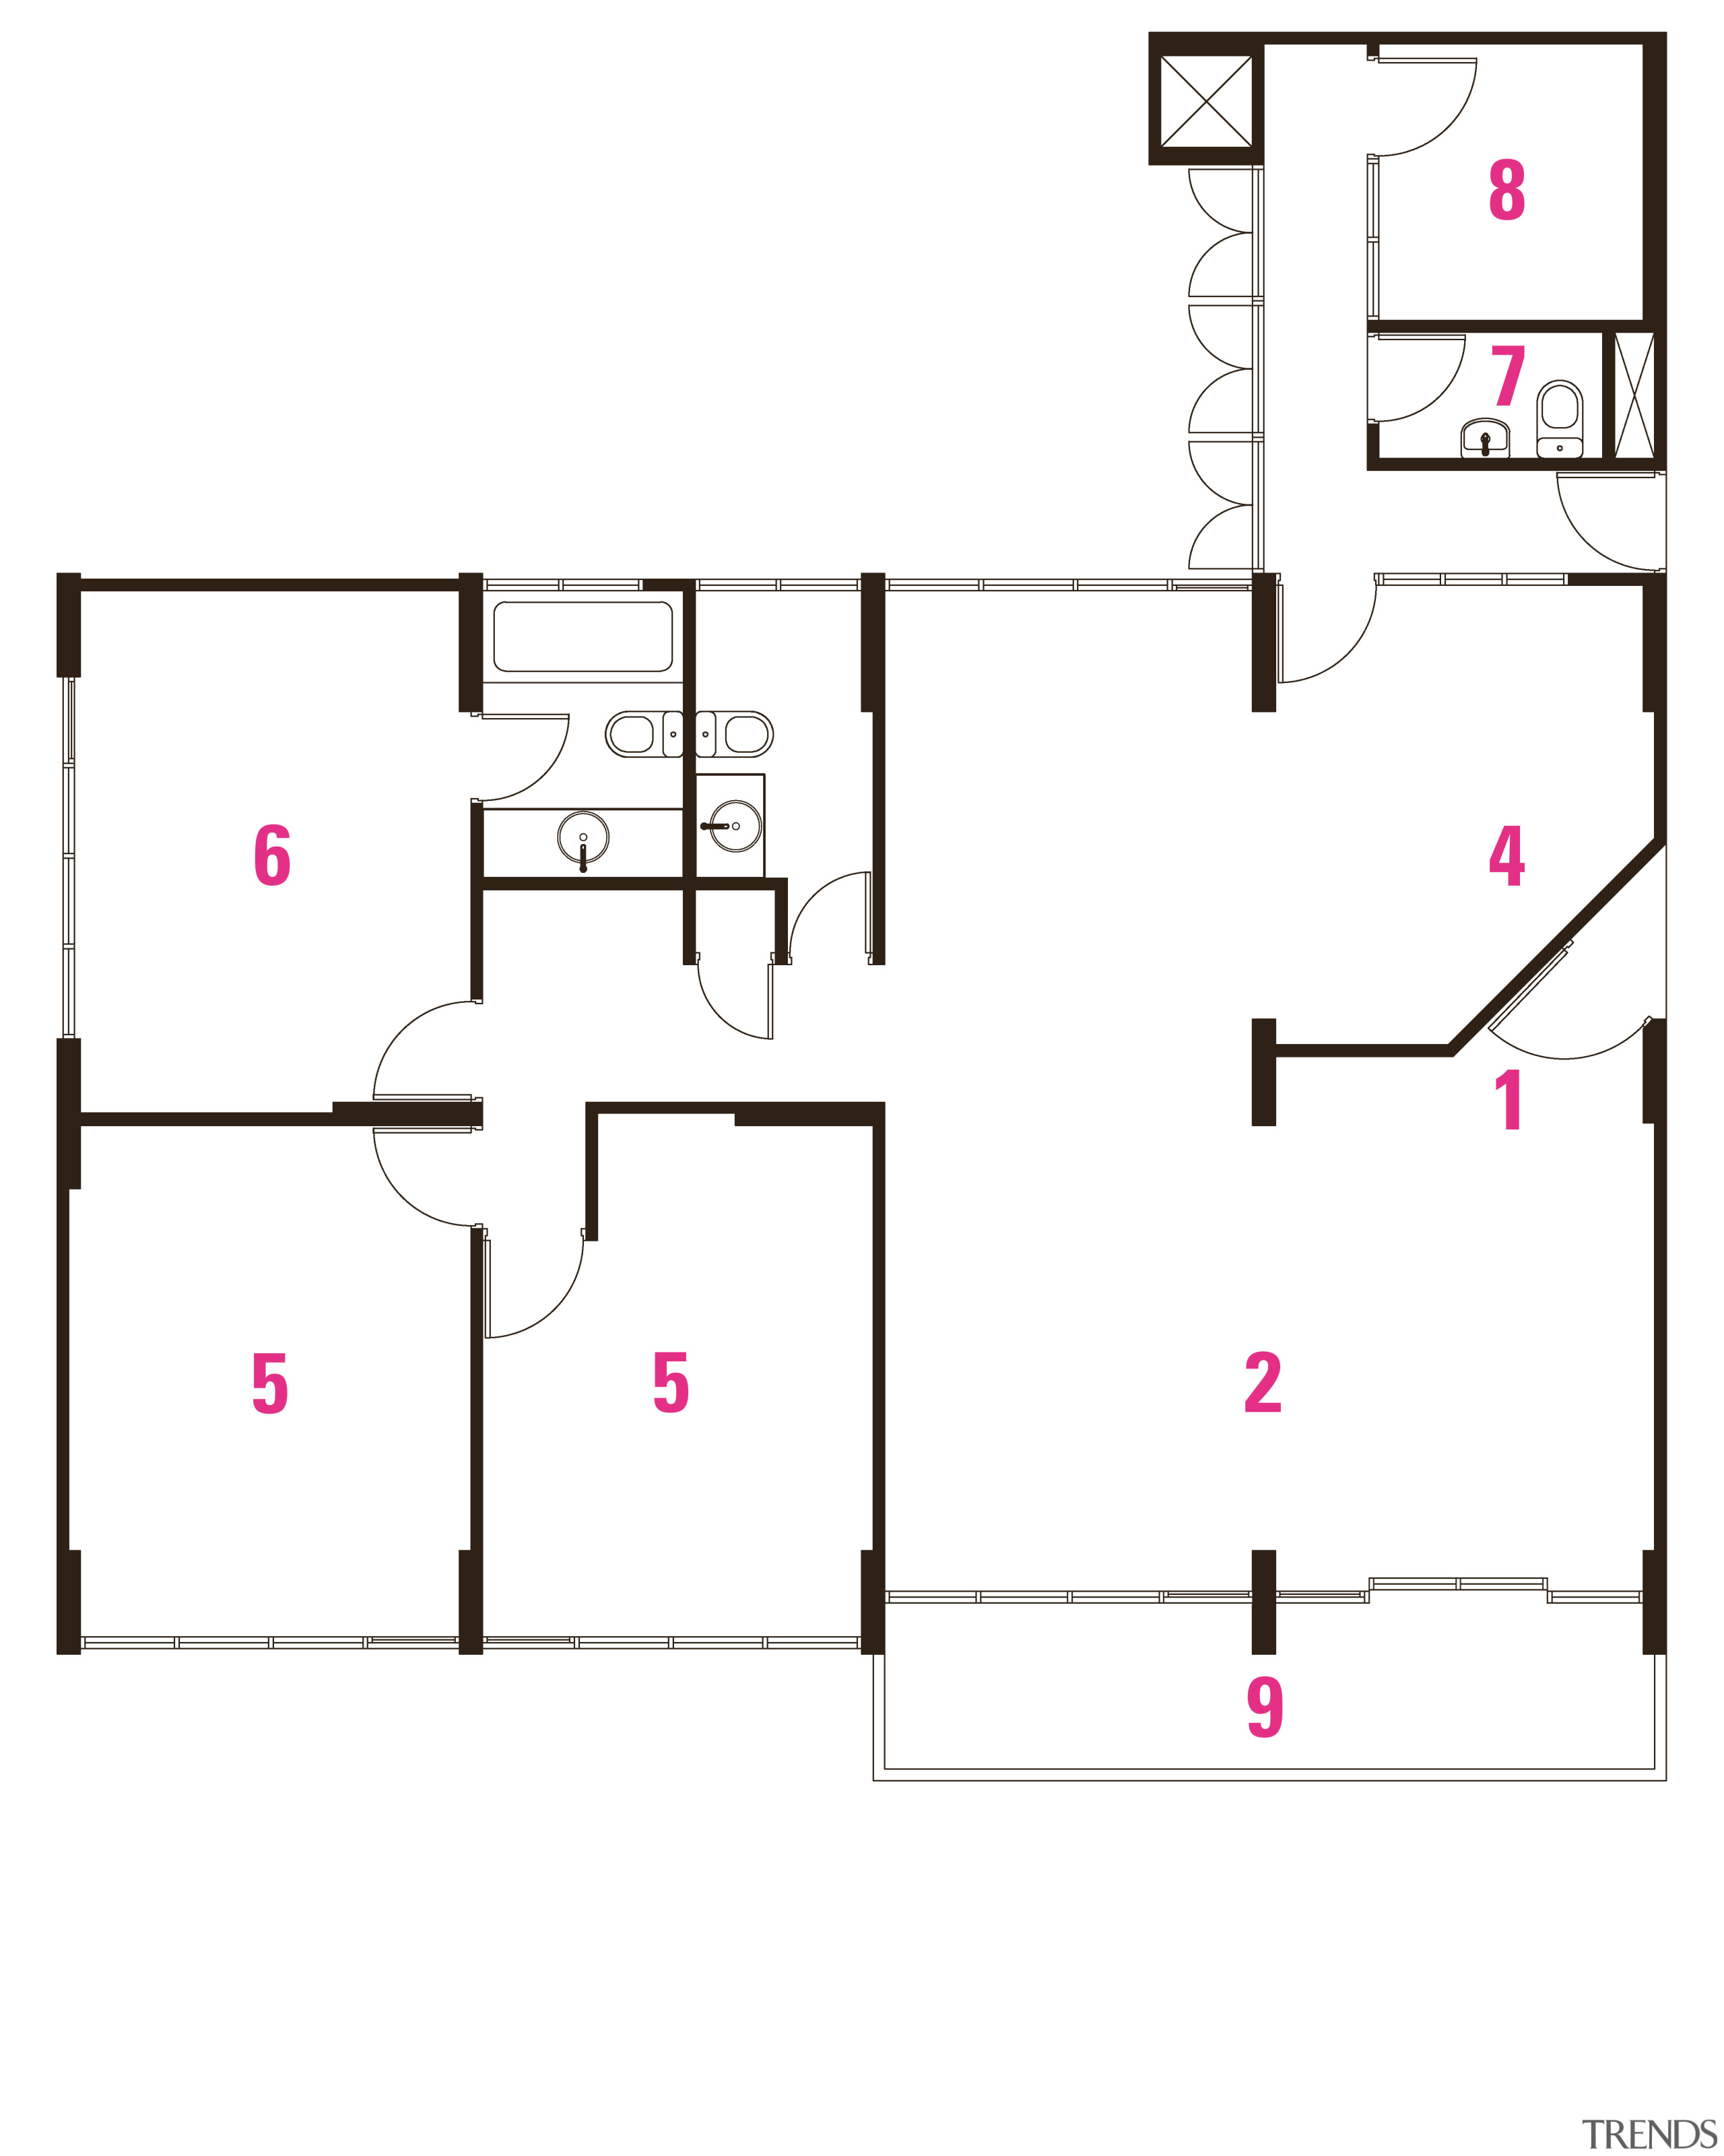 Legend to before plan of apartment remodelled by angle, area, design, diagram, drawing, floor plan, font, line, pattern, product, product design, text, white